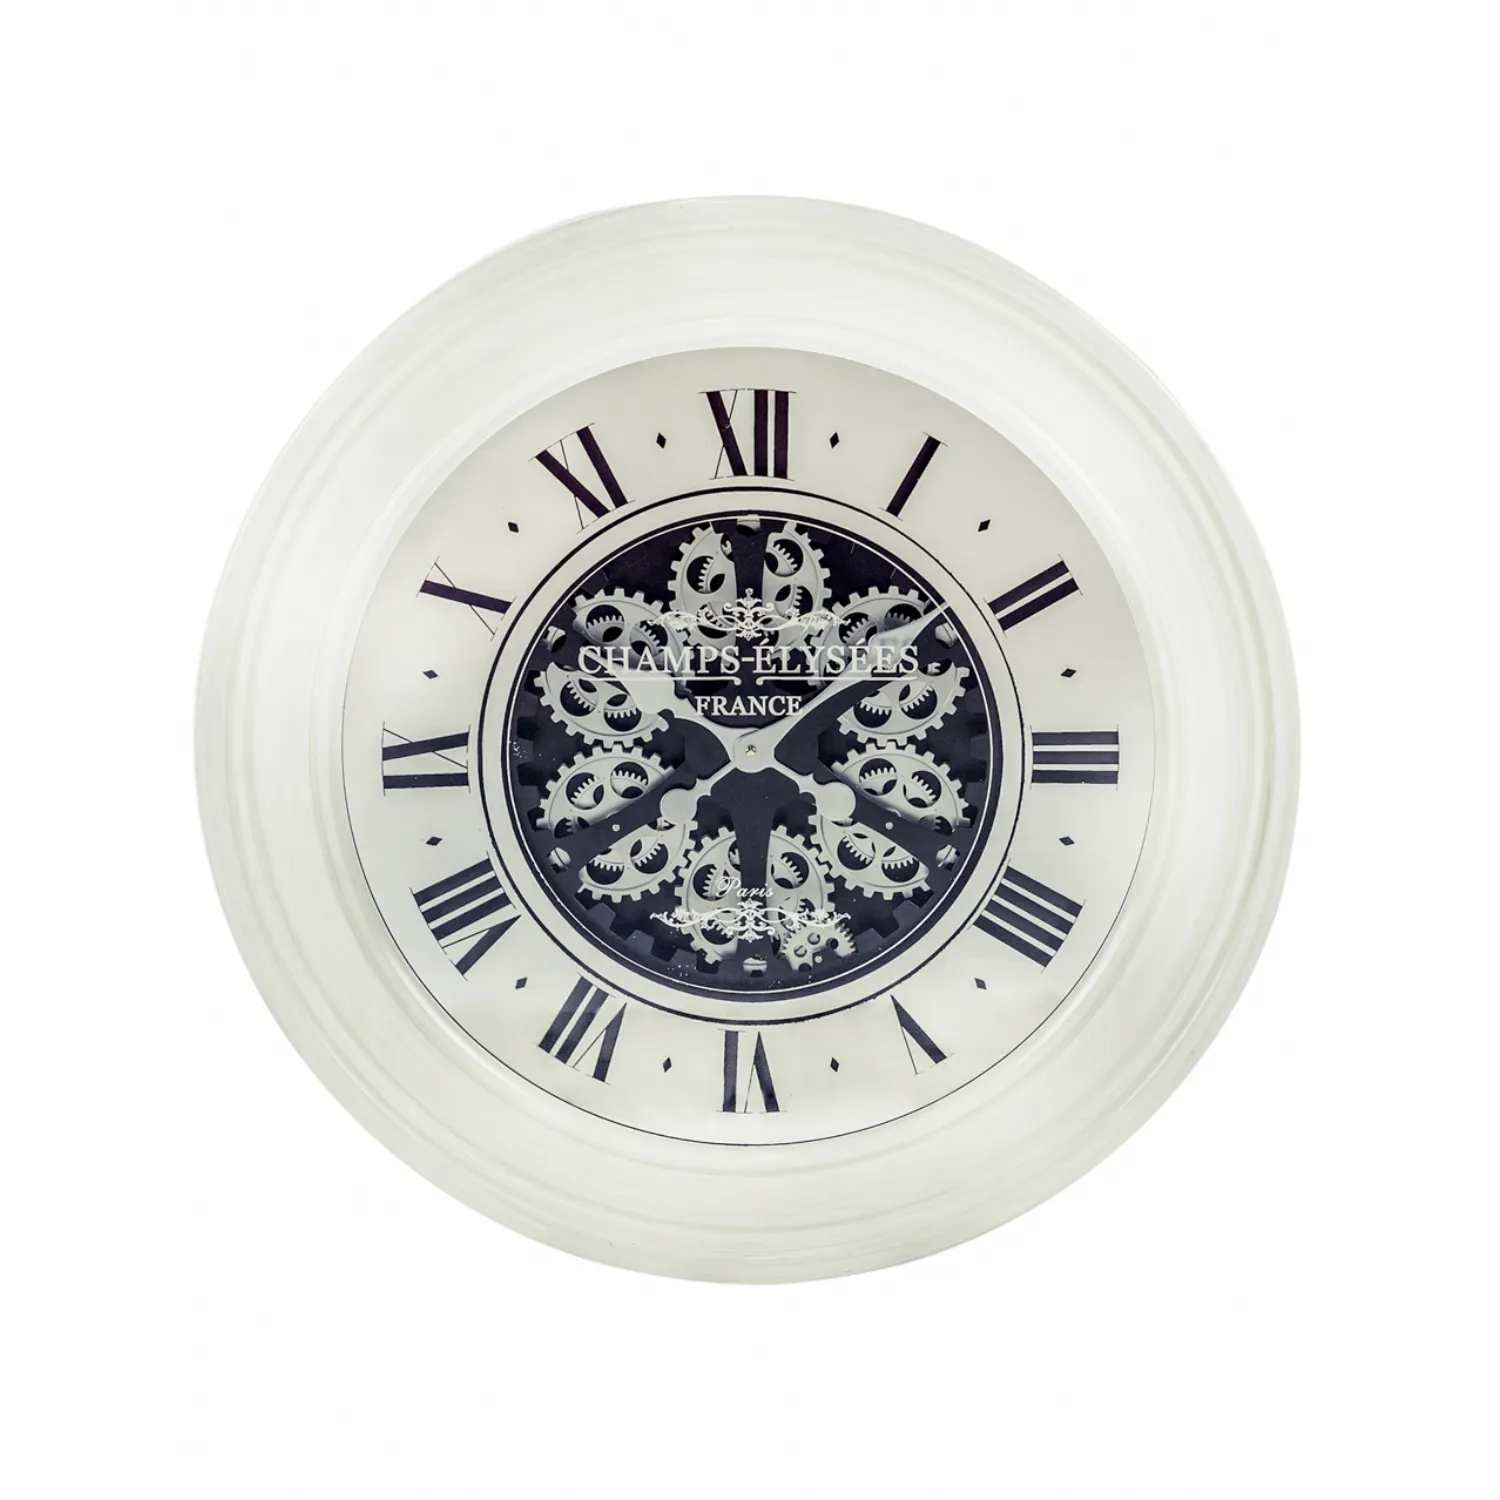 Round Cream Mirrored Face Moving Gears Wall Clock